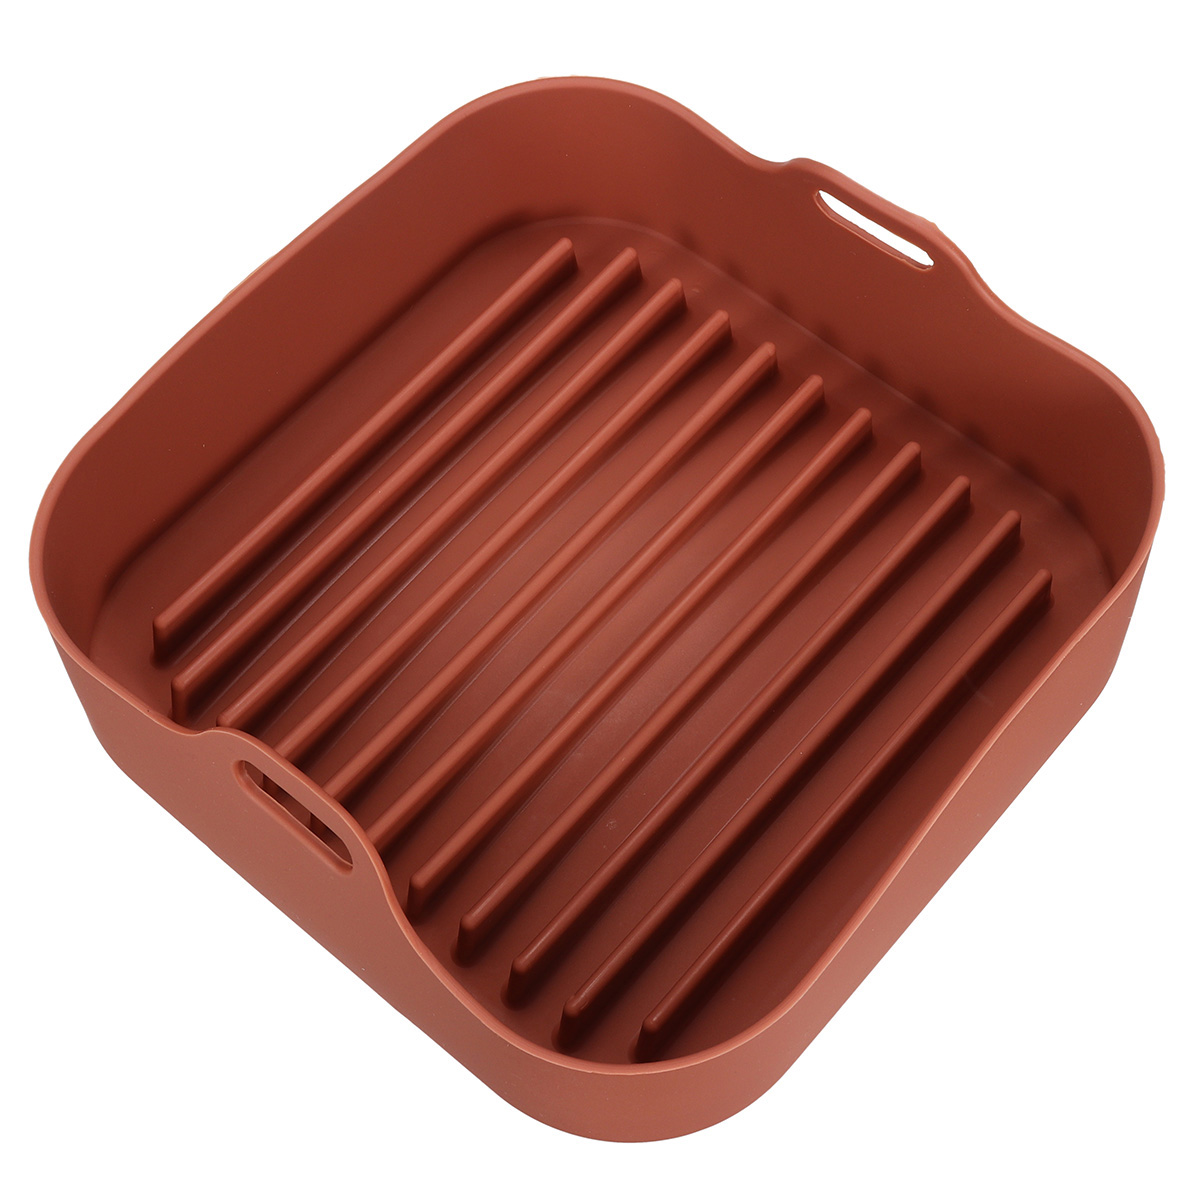 Multifunctional-Silicone-Baking-Tray-High-Temperature-Resistant-Non-stick-Bread-Fried-Baking-Pan-wit-1864776-15